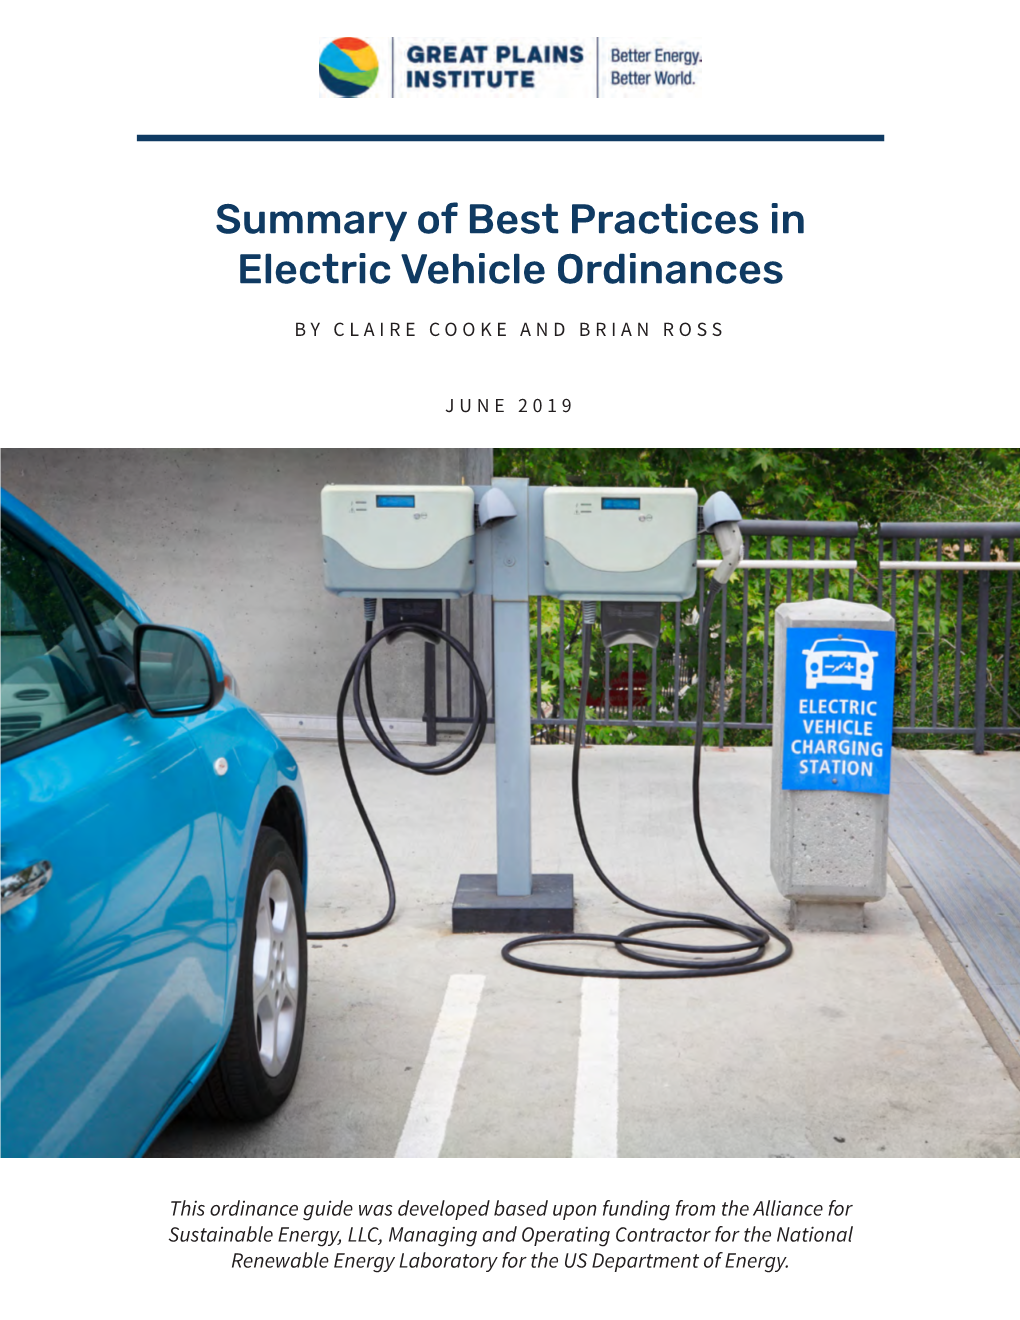 Summary of Best Practices in Electric Vehicle Ordinances